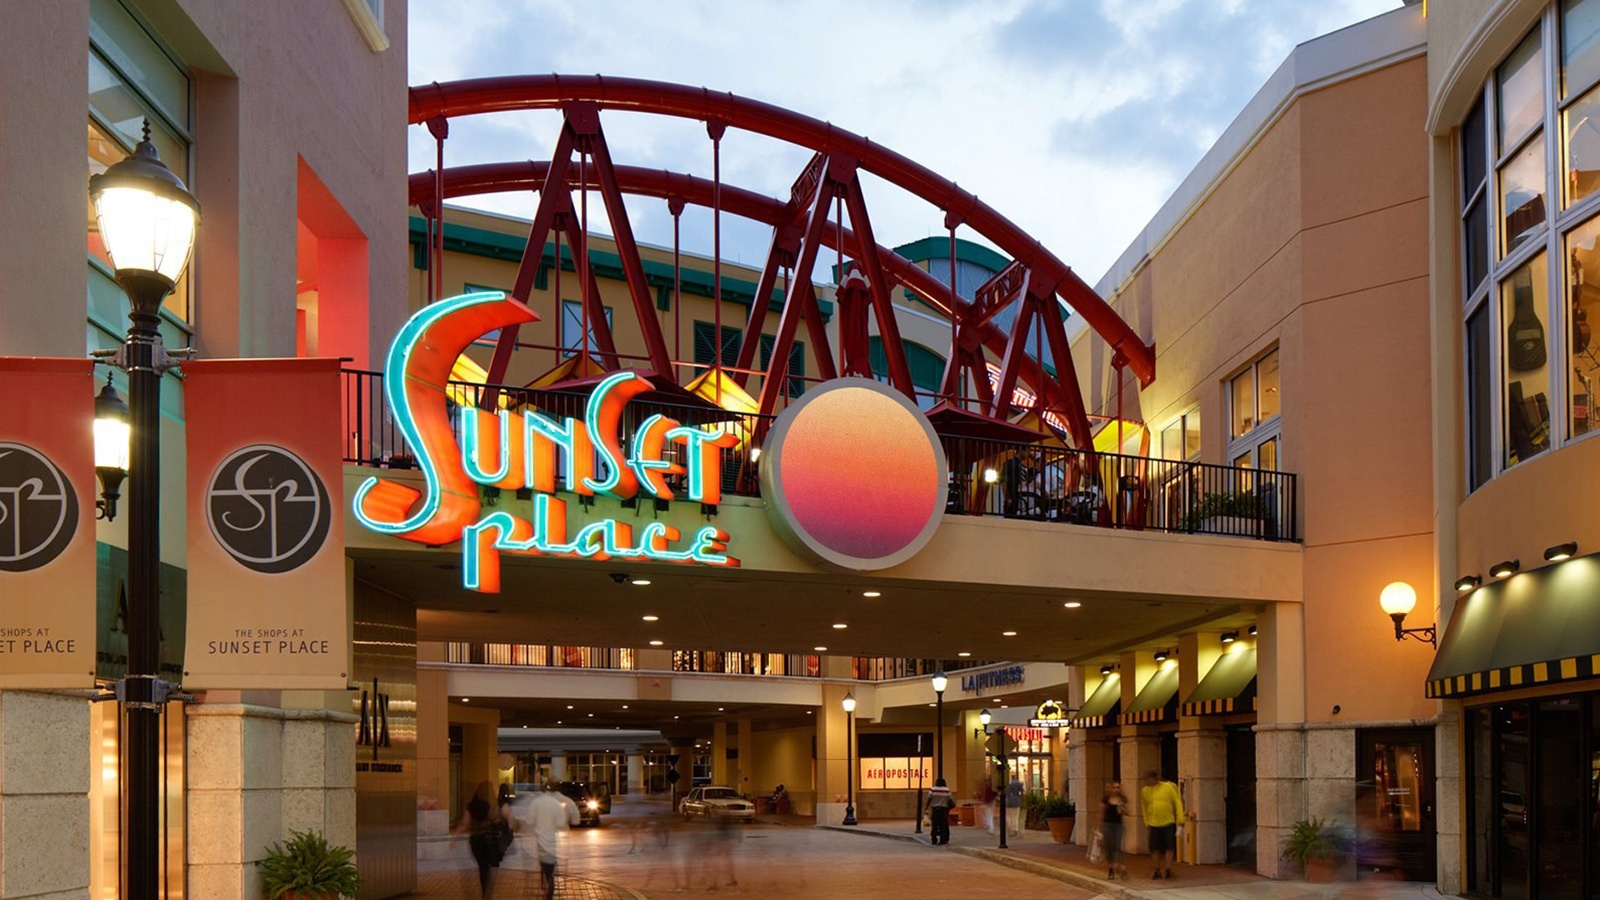 Major Changes in the Works For Shops at Sunset Place